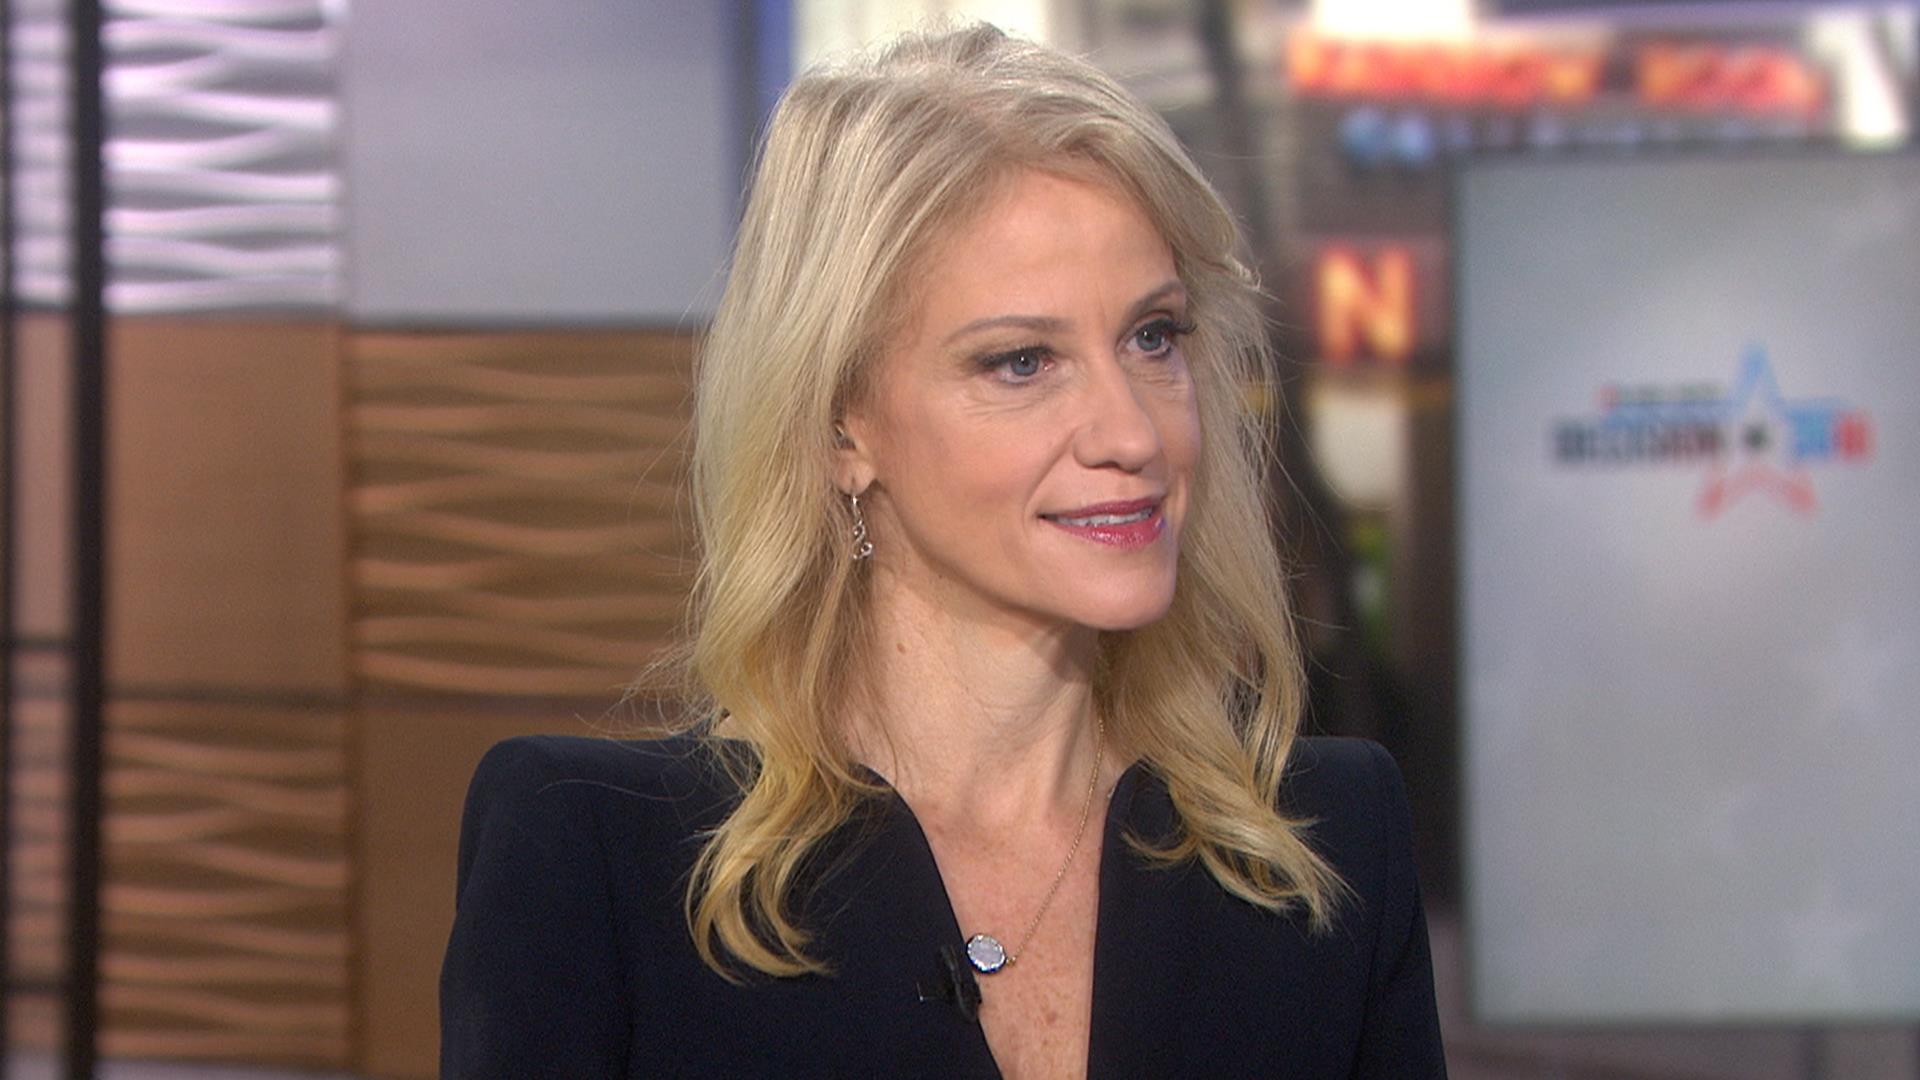 Kellyanne Conway: Clinton emails 'still troubling,' Trump setting sights on Michigan